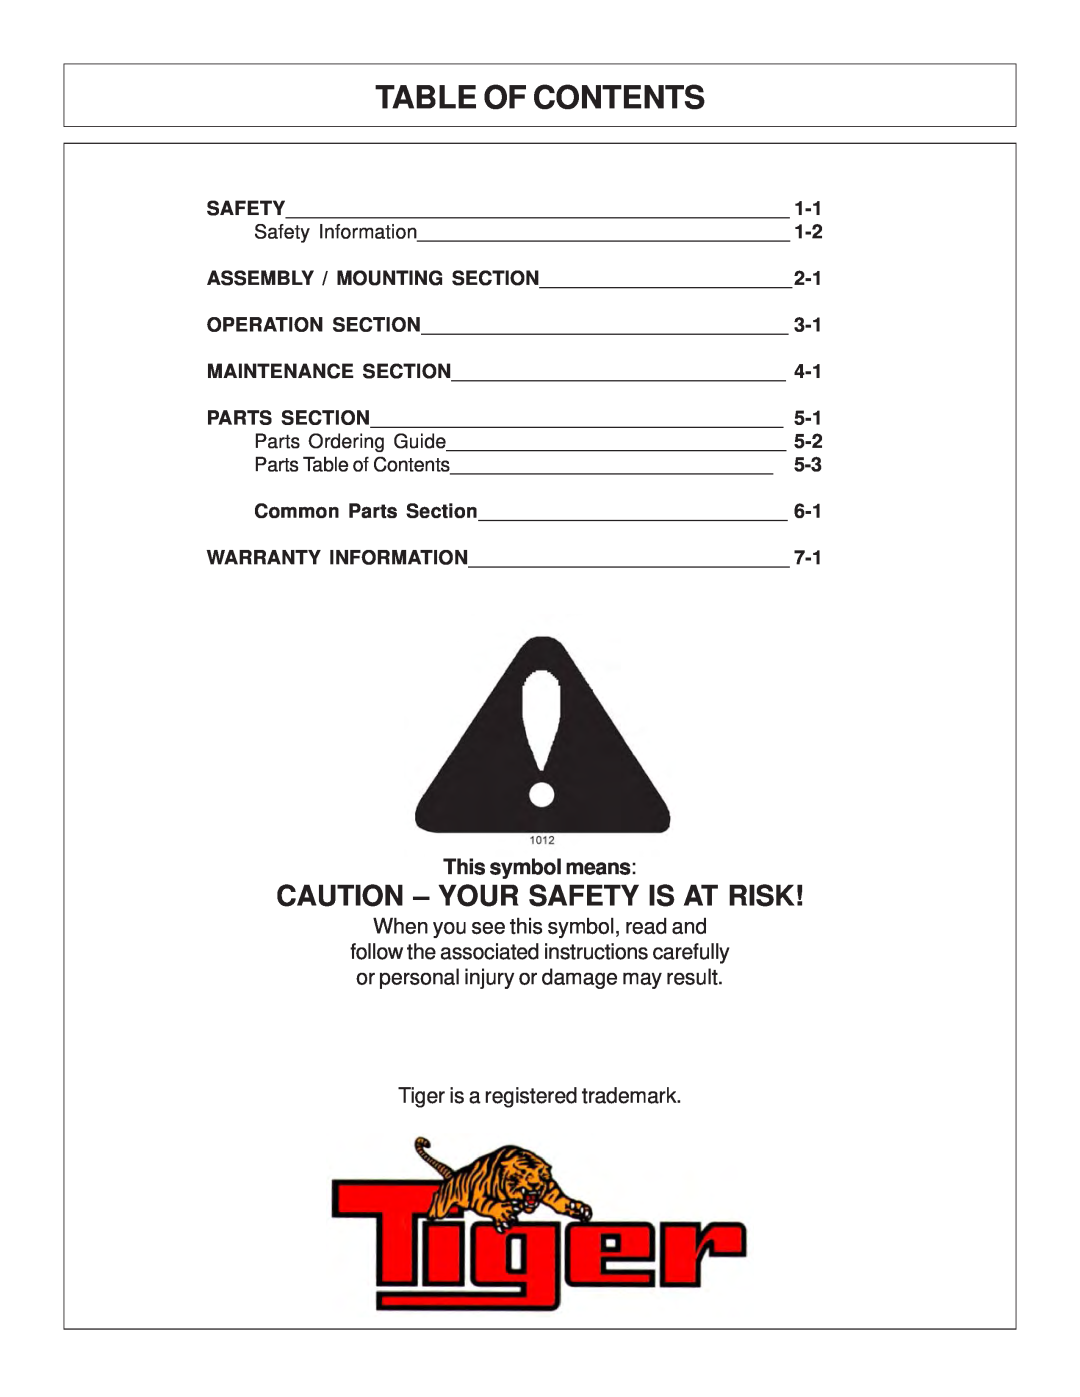 Tiger JD 62-6420 Table Of Contents, Caution - Your Safety Is At Risk, This symbol means, Tiger is a registered trademark 